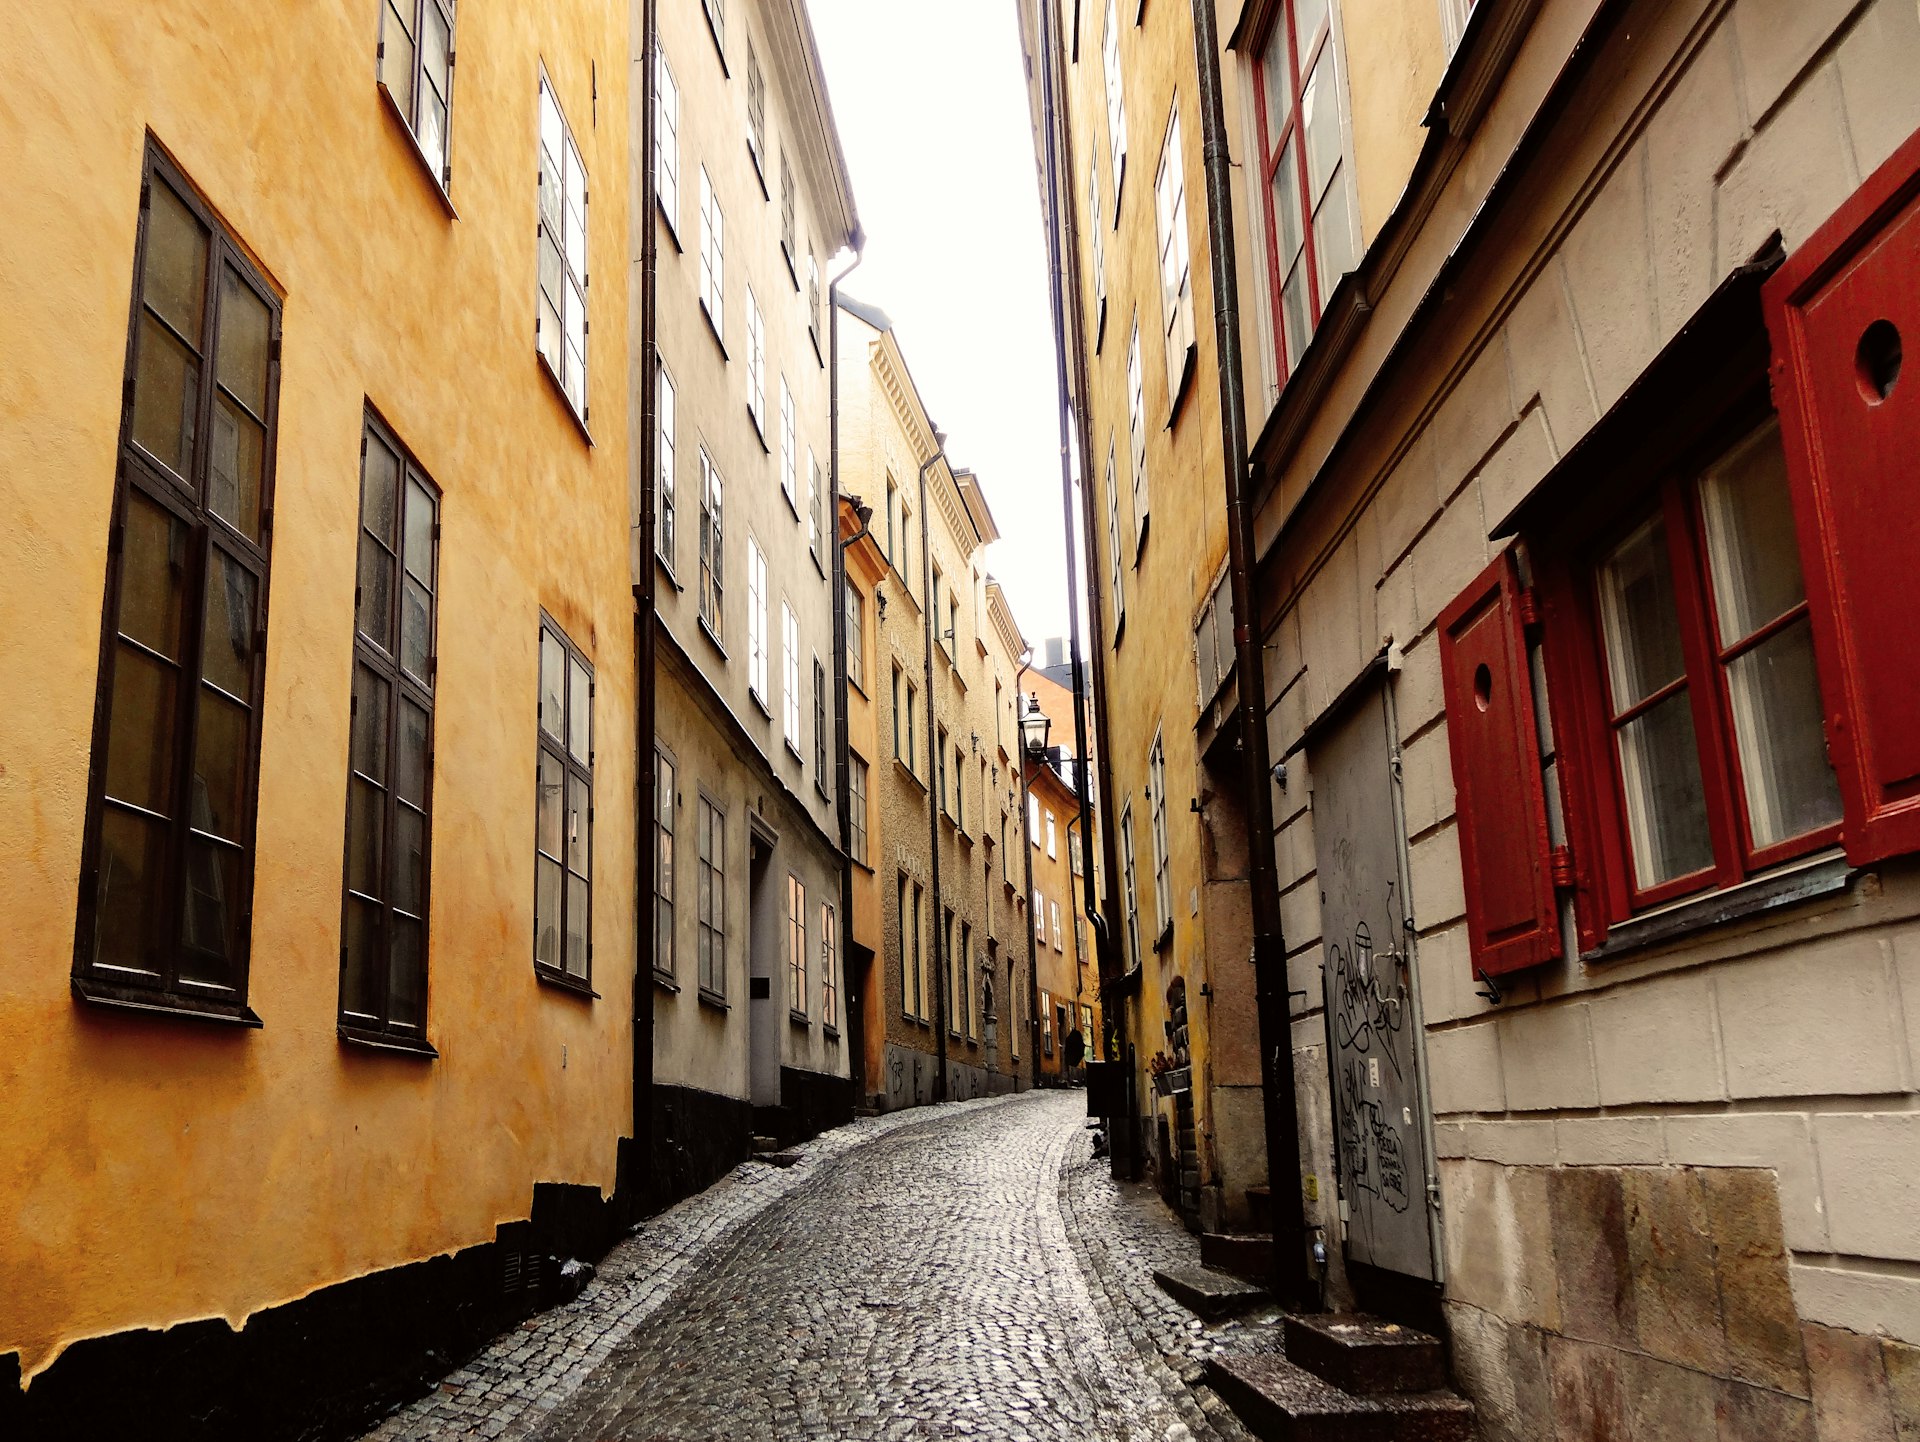 A picturesque cobbled alley in Gamla Stan, Stockholm